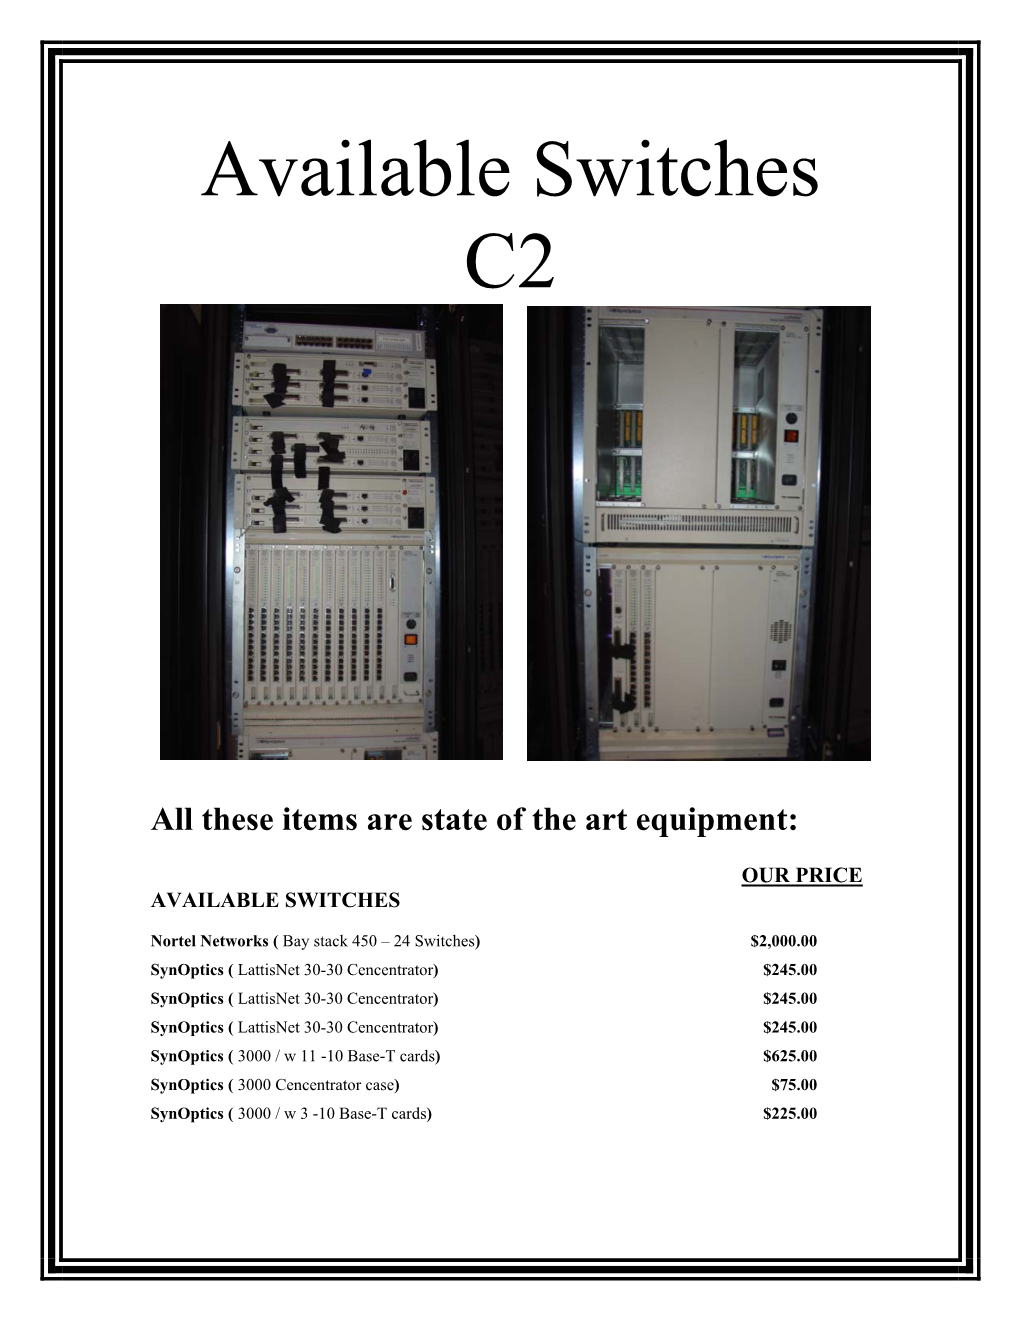 Available Switches C2